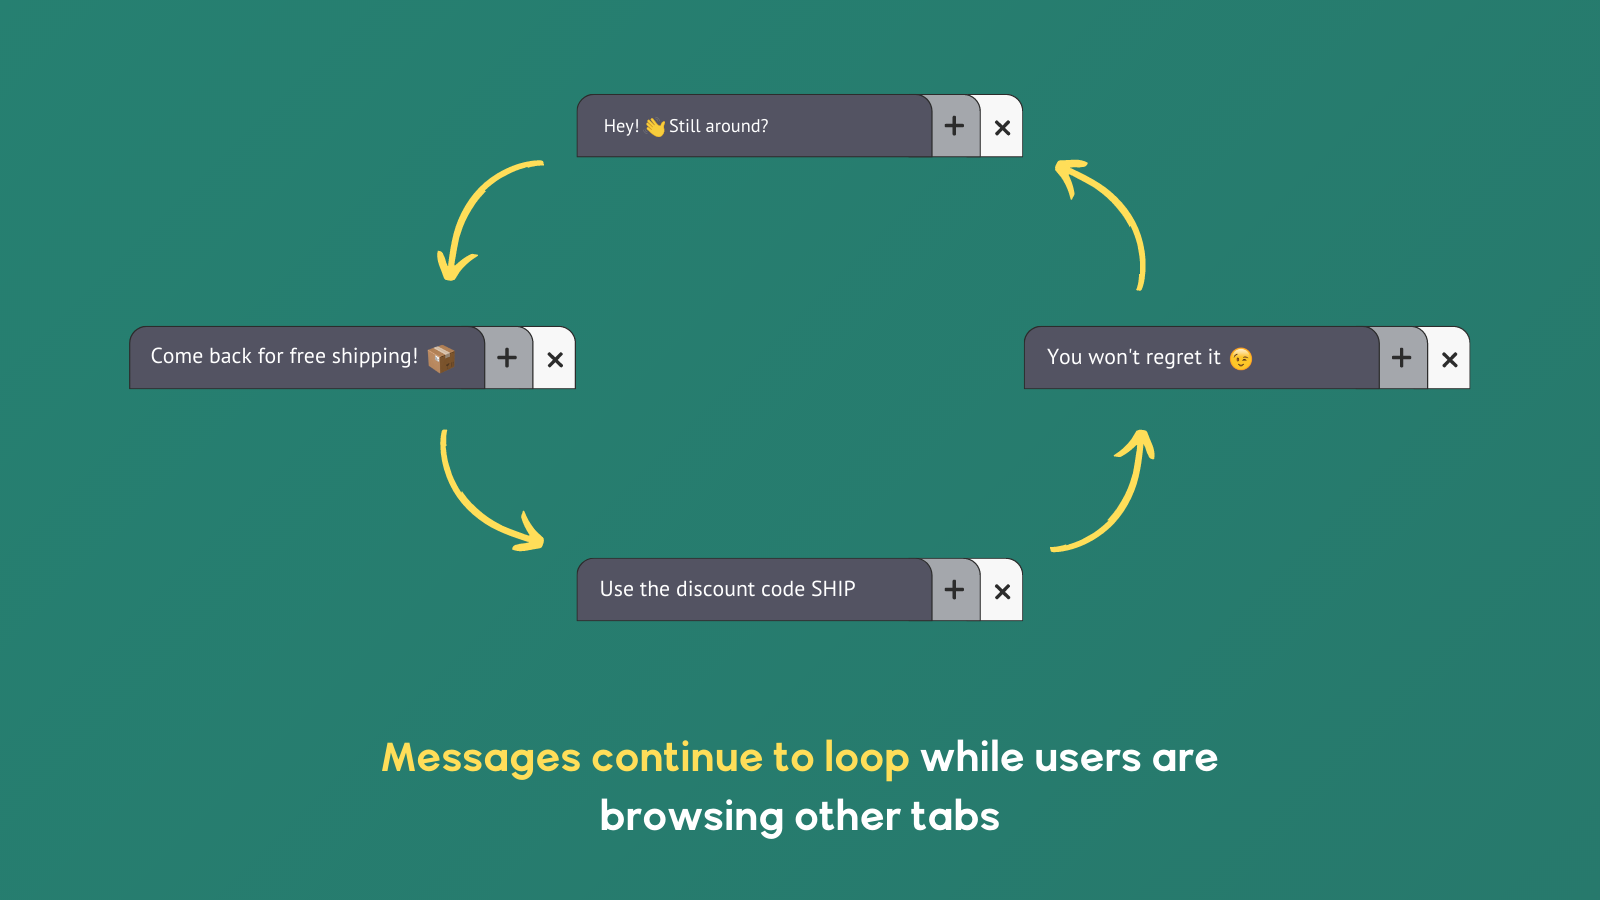 Messages continue to loop while users are browsing other tabs